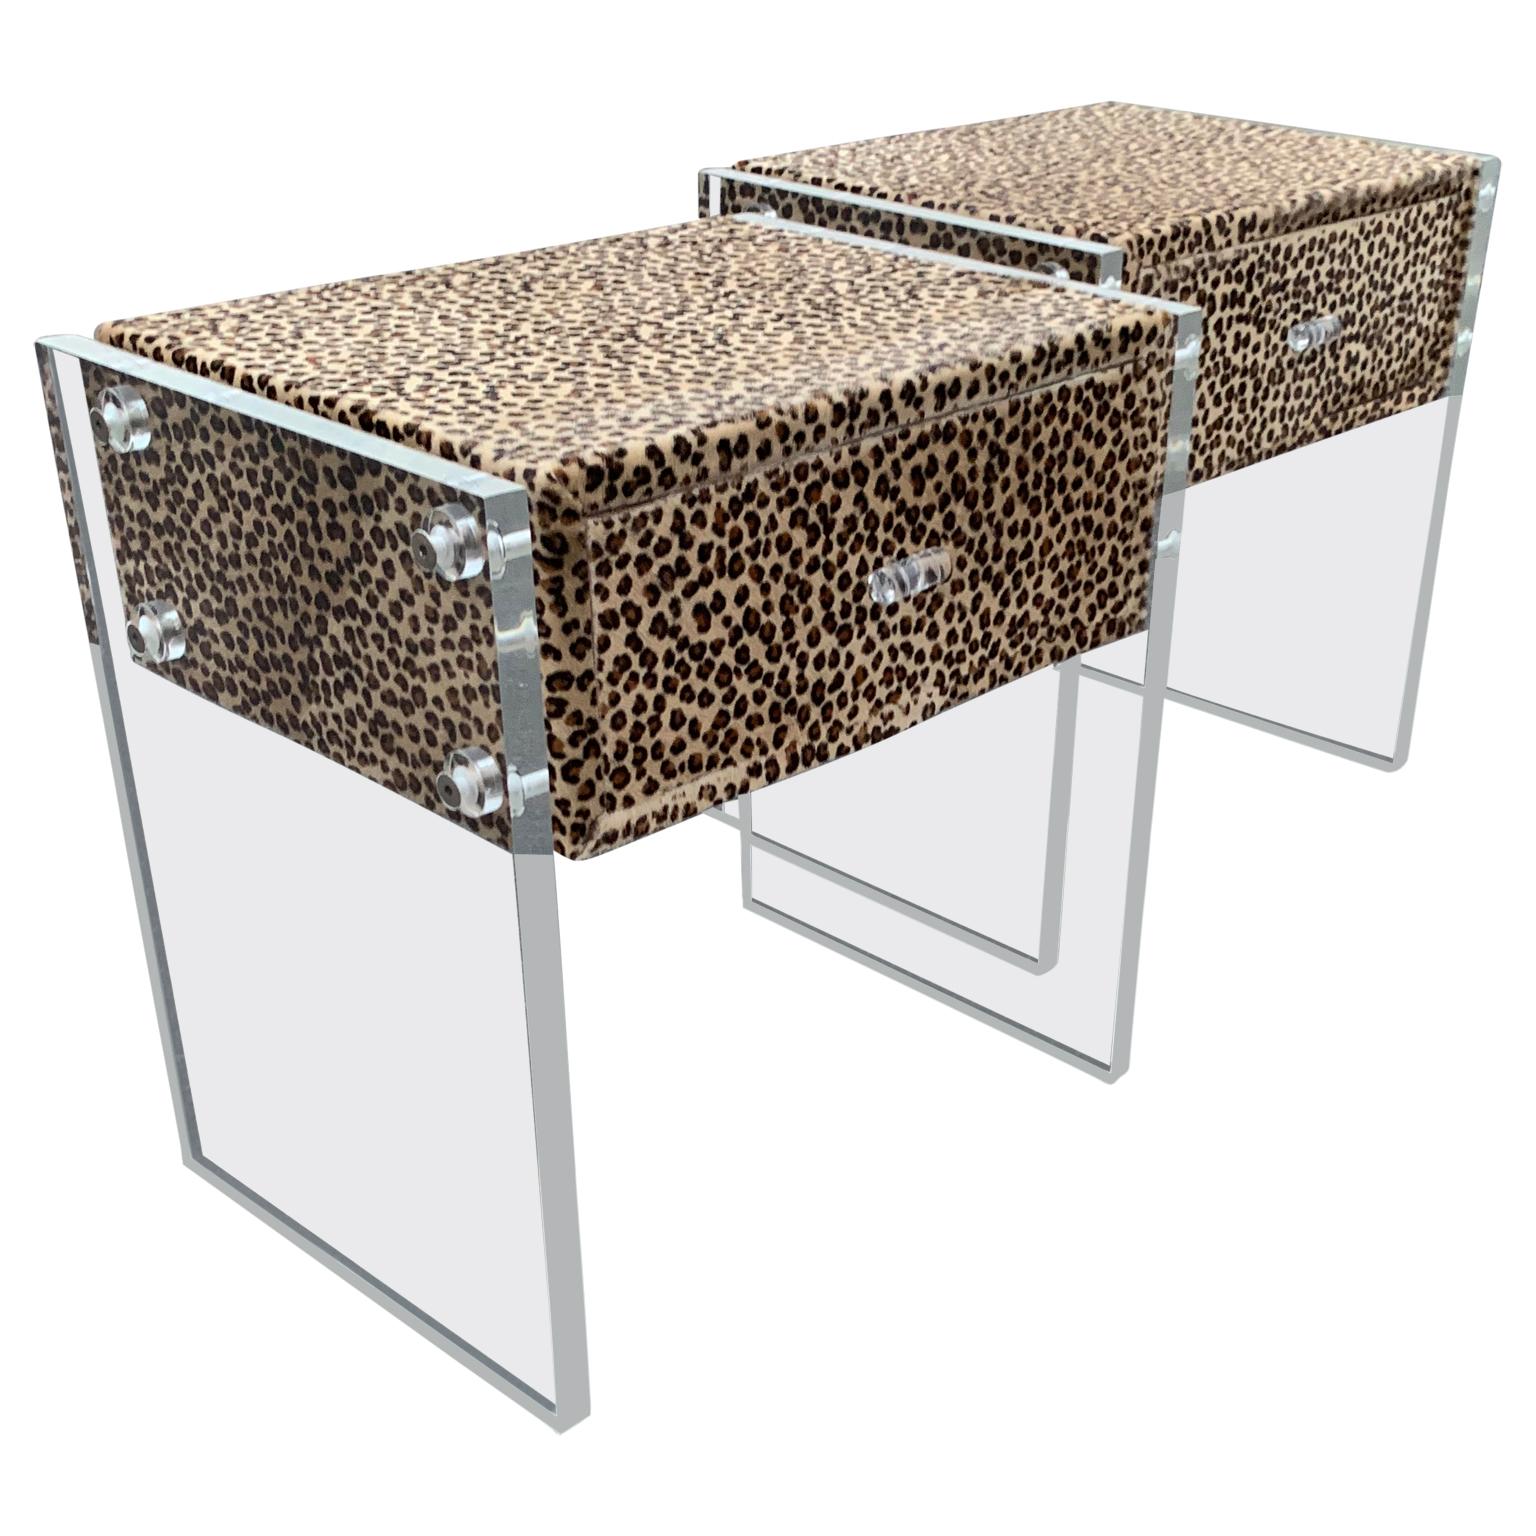 Pair of faux cheetah skin upholstered nightstands with Lucite side panels.